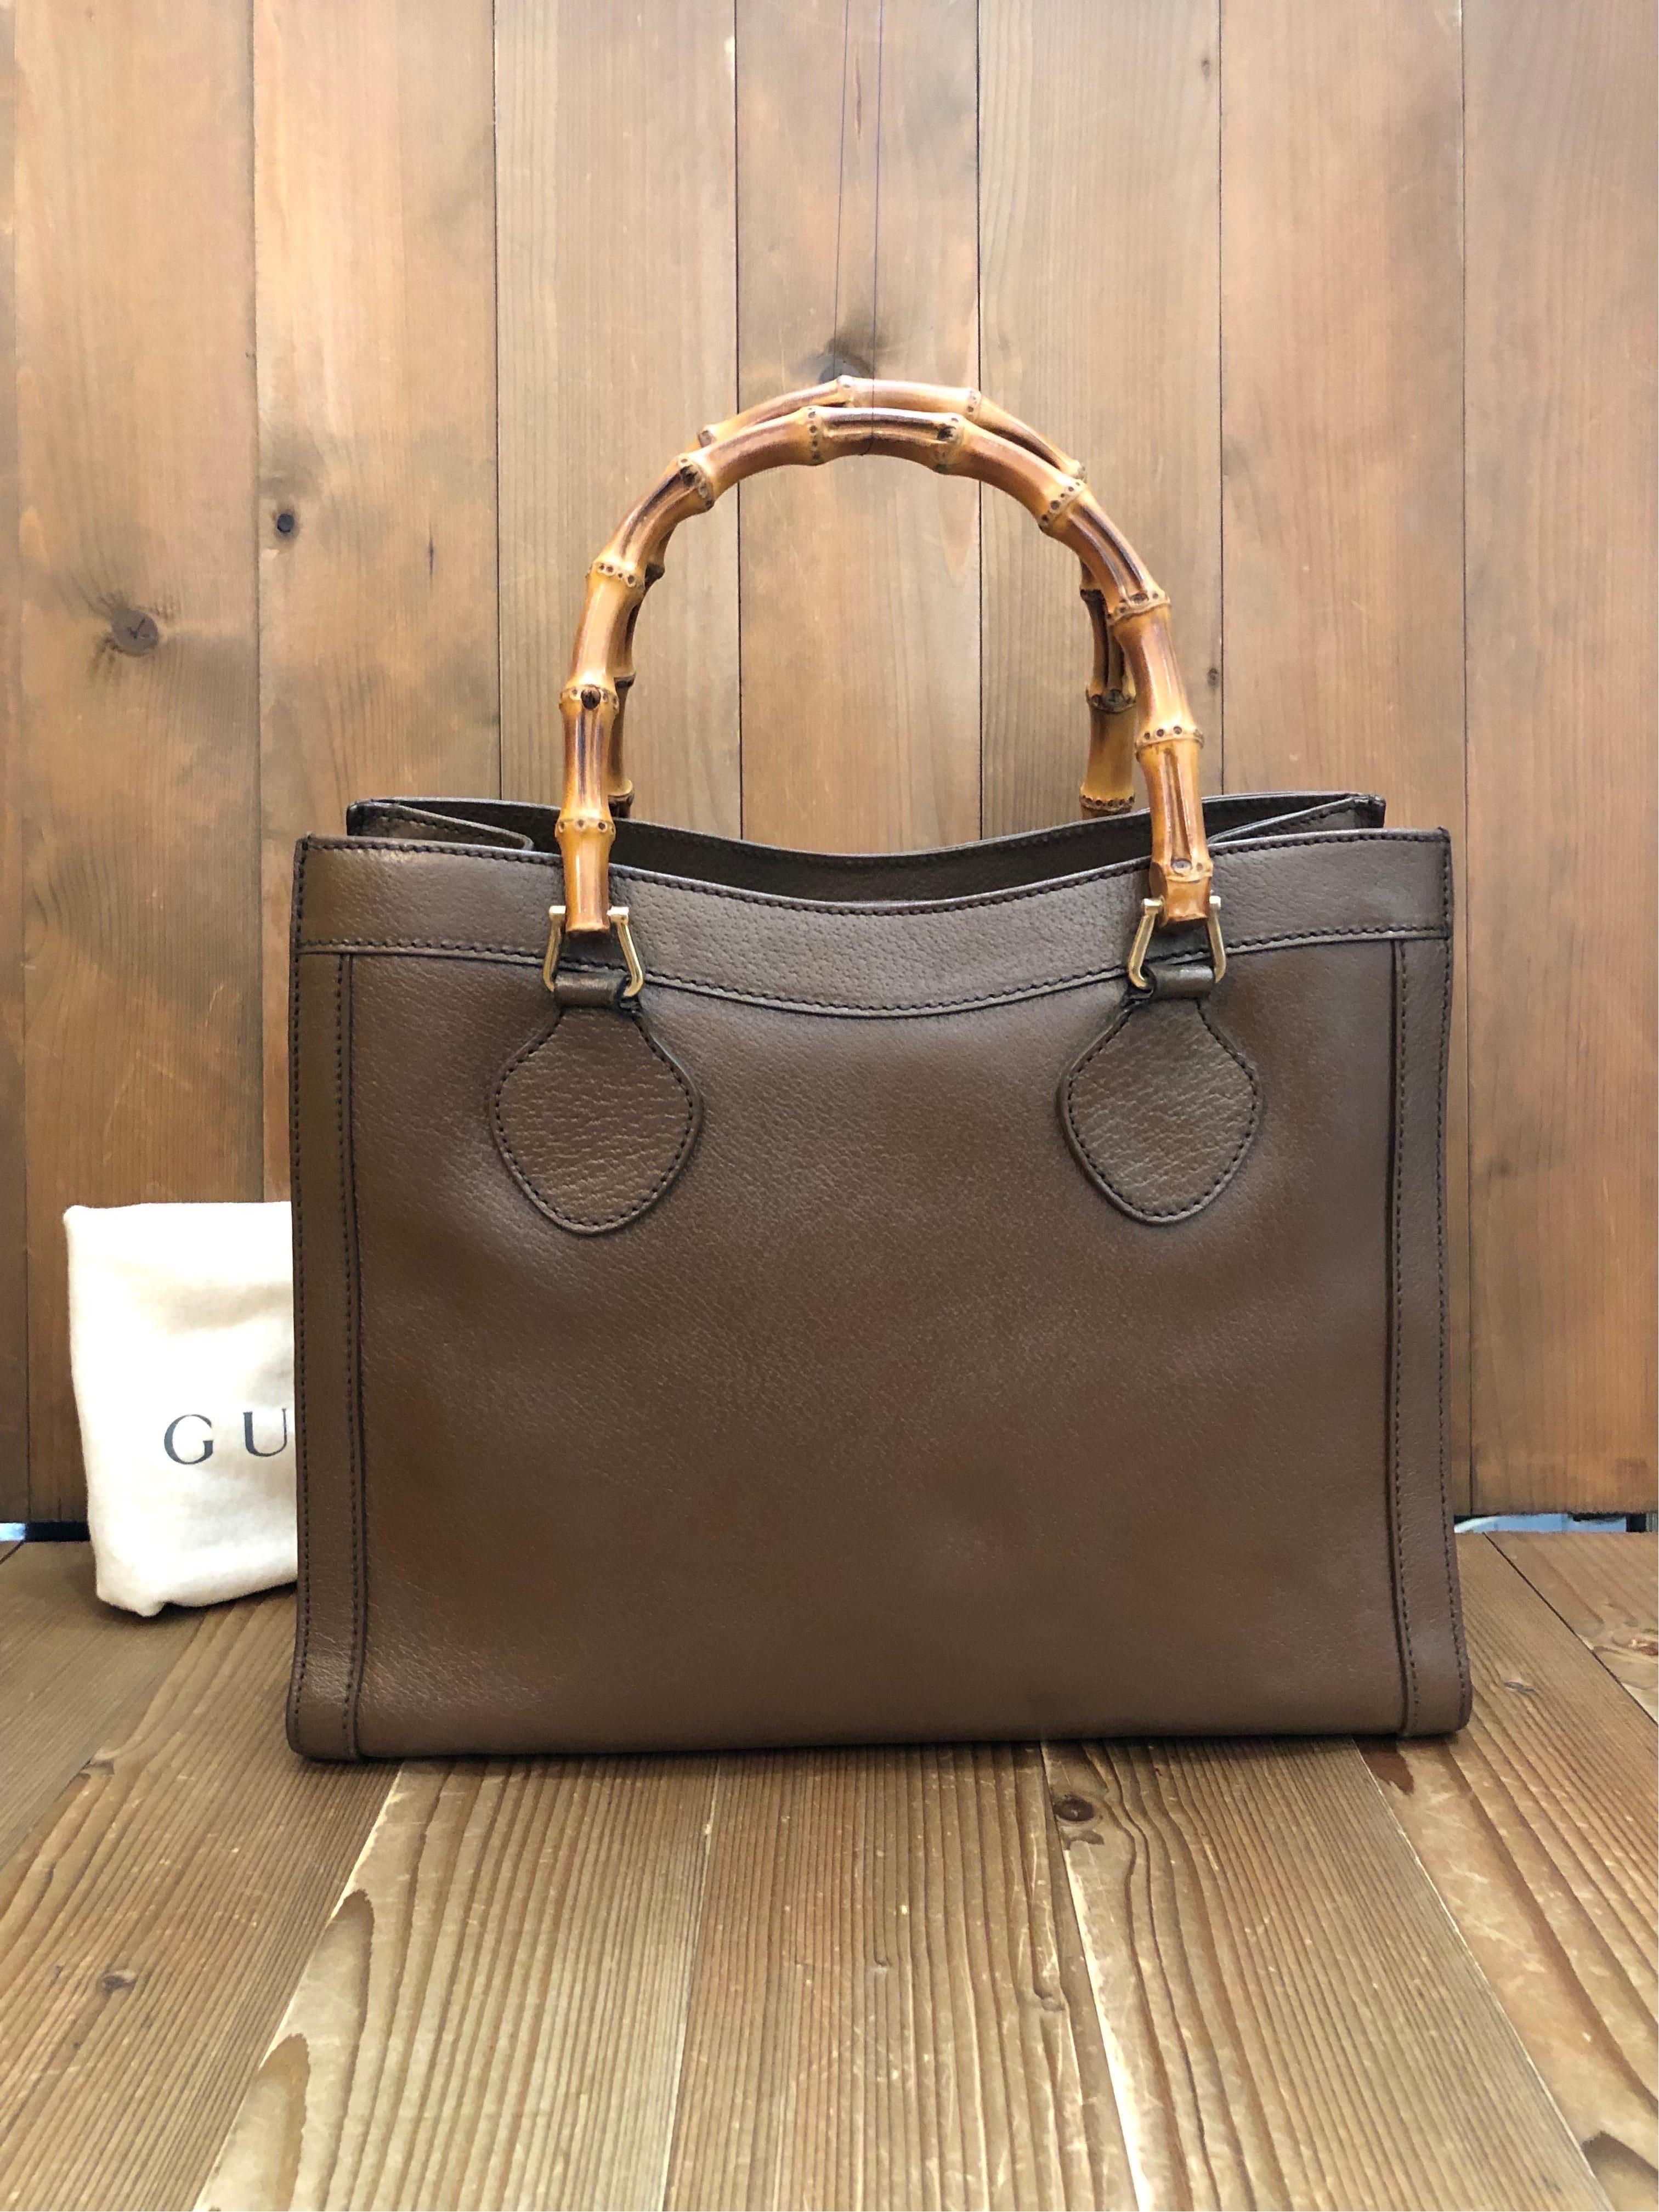 This vintage GUCCI Diana bamboo tote is crafted of pigskin’s leather in chocolate brown. Top magnetic snap closure opens to luxurious nubuck leather interior featuring two main compartments/one zip compartment with one interior zippered pocket. Made